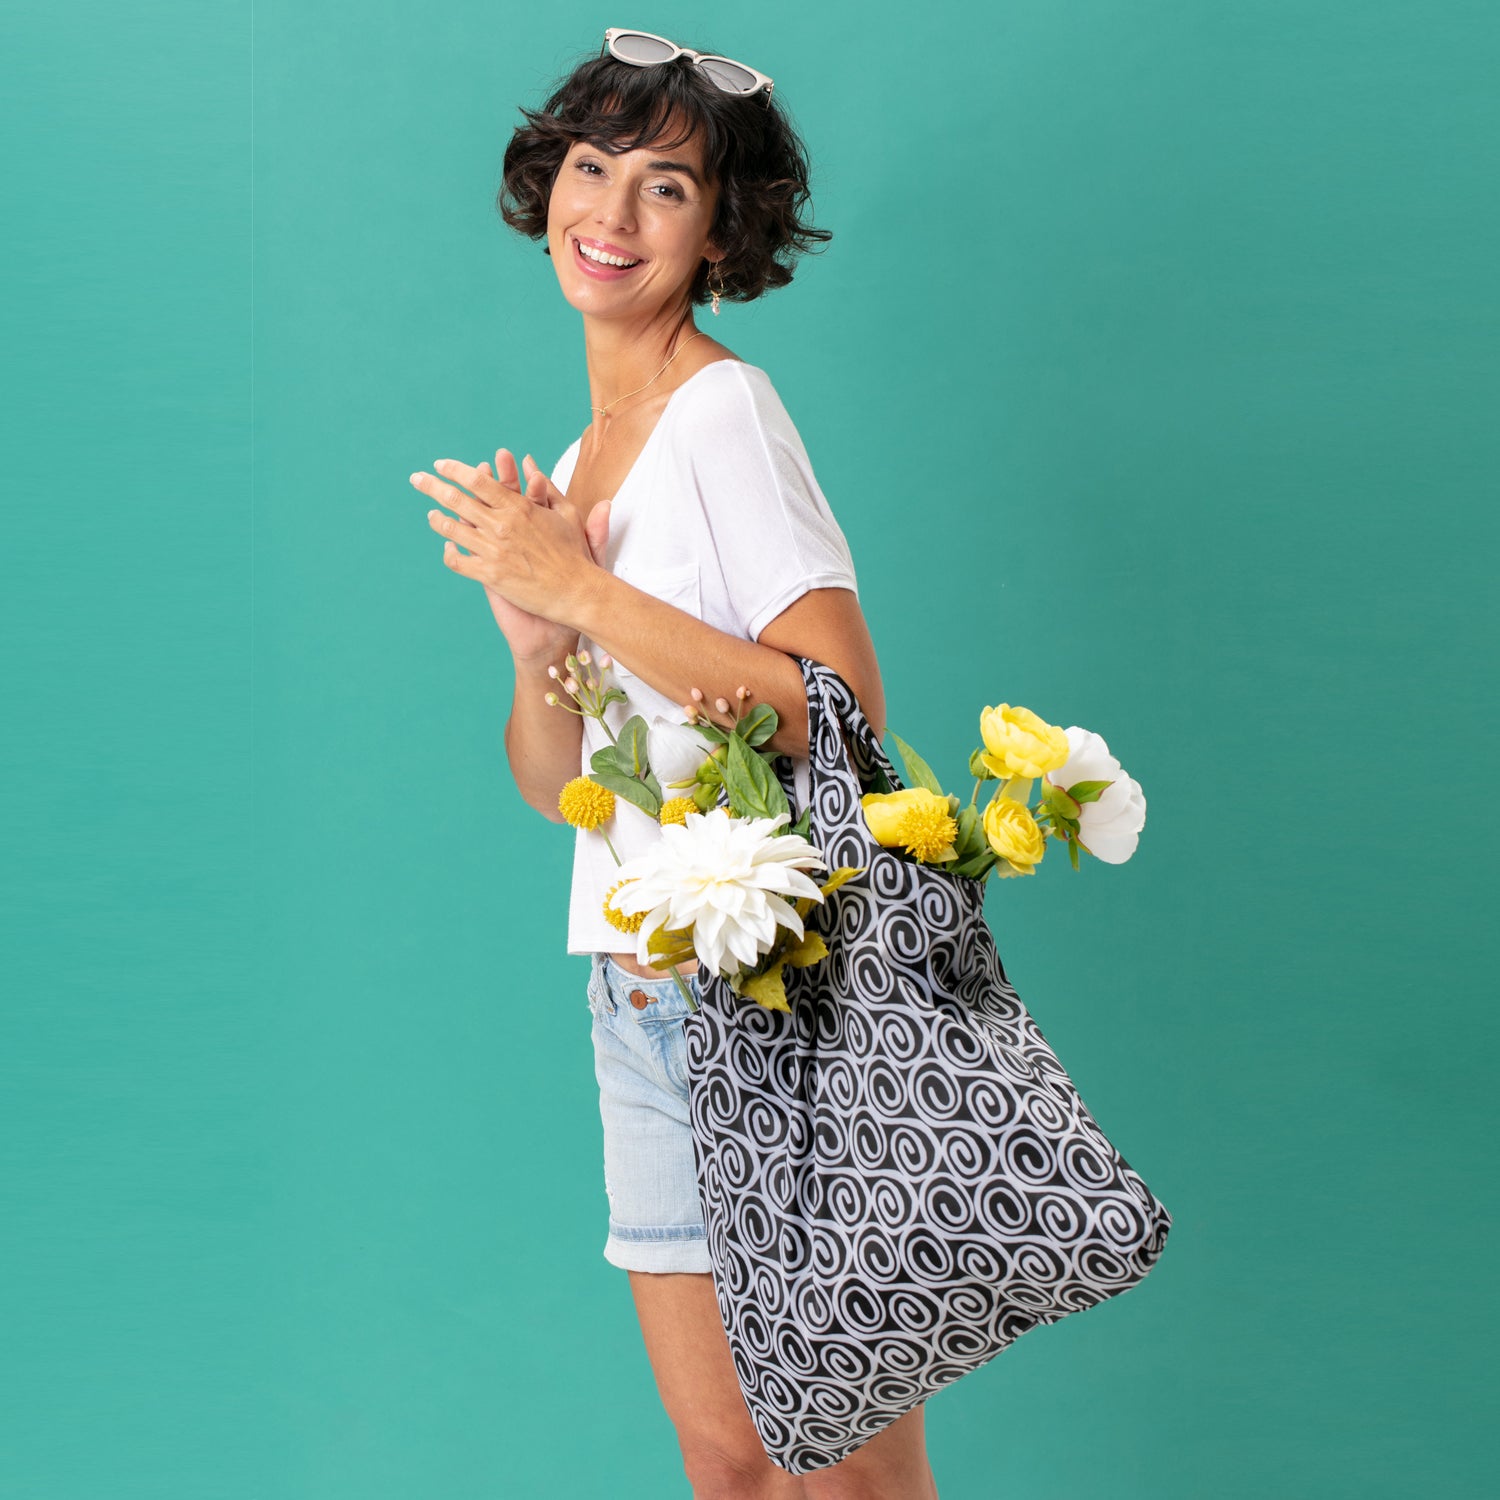 9 Stylish Pegs For Posing With Your Shopping Bags